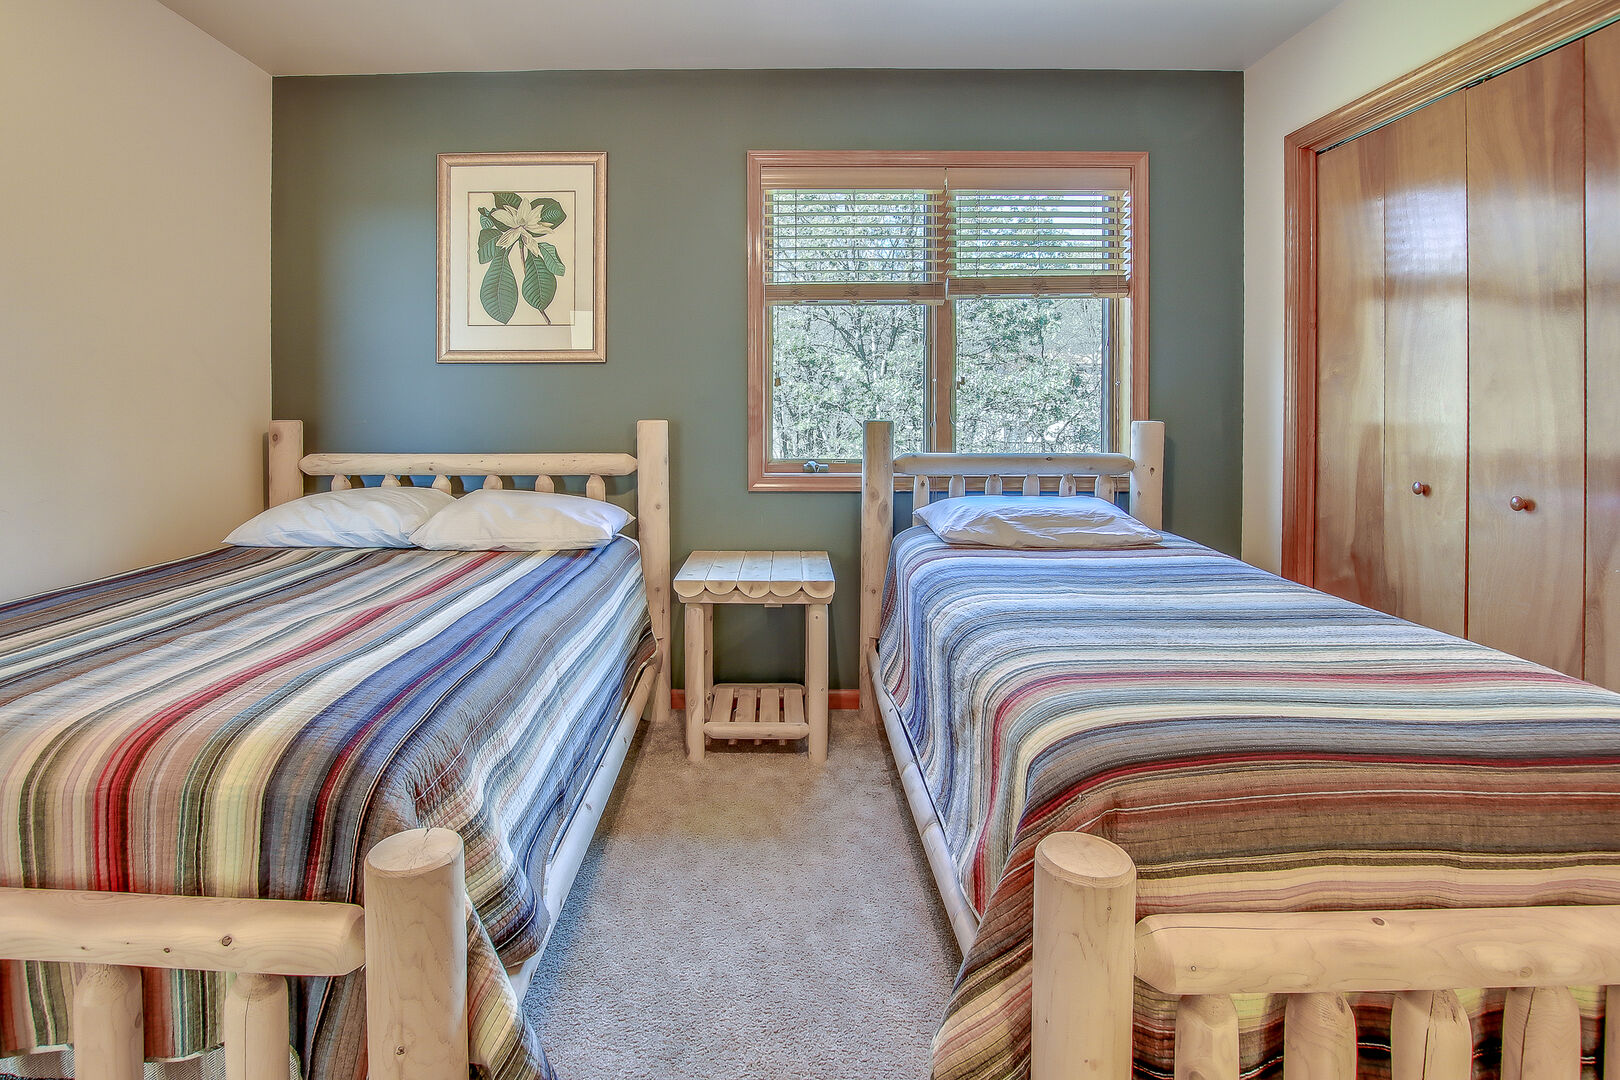 An Image of One Bedroom Featured in Poconos Lake Rental.